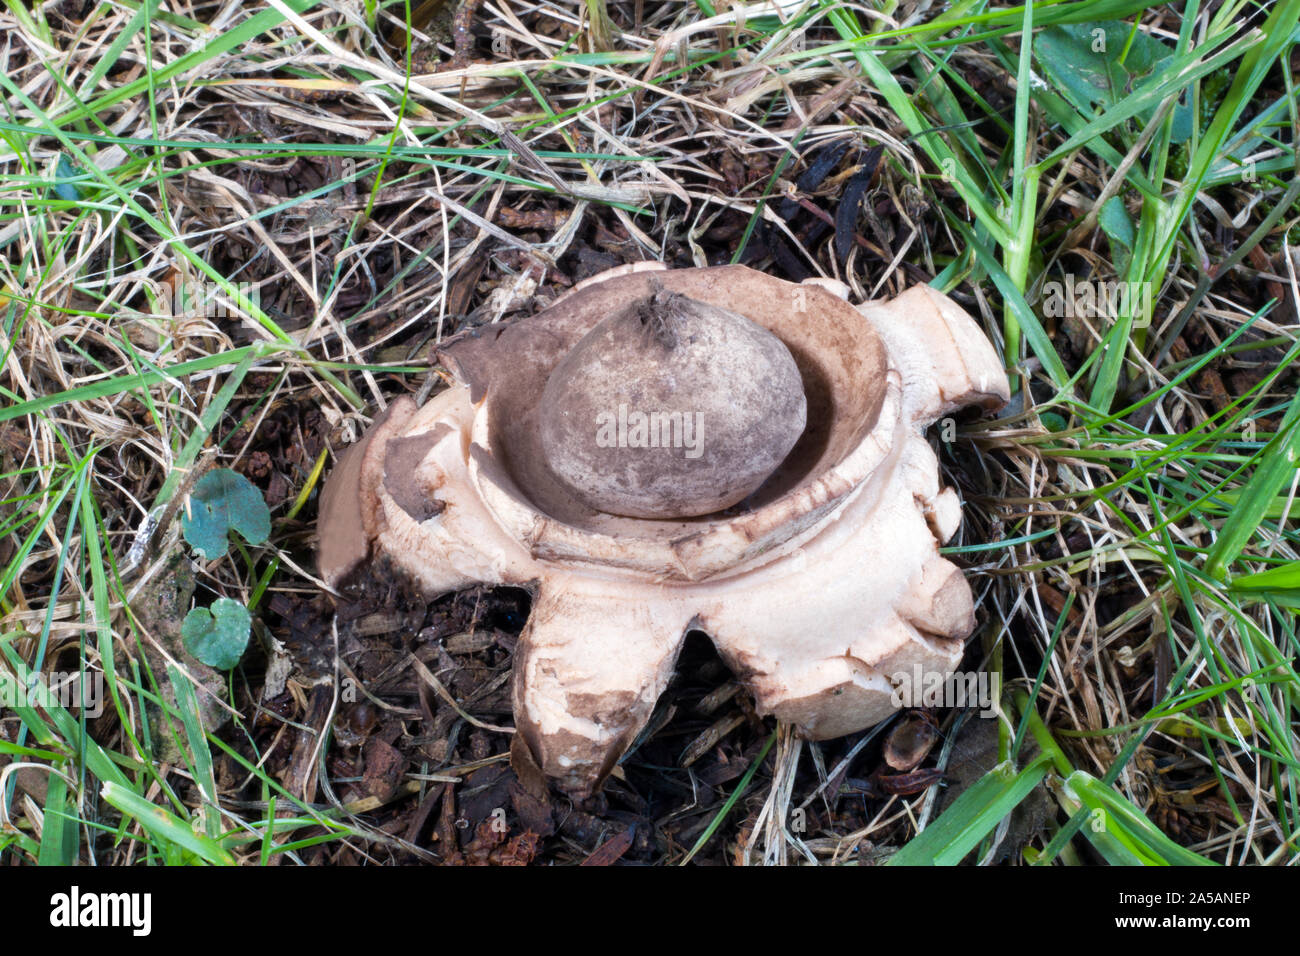 Geastrum triplex (collared earthstar) was here found at the base of a yew tree in a churchyard in North Wales. Stock Photo